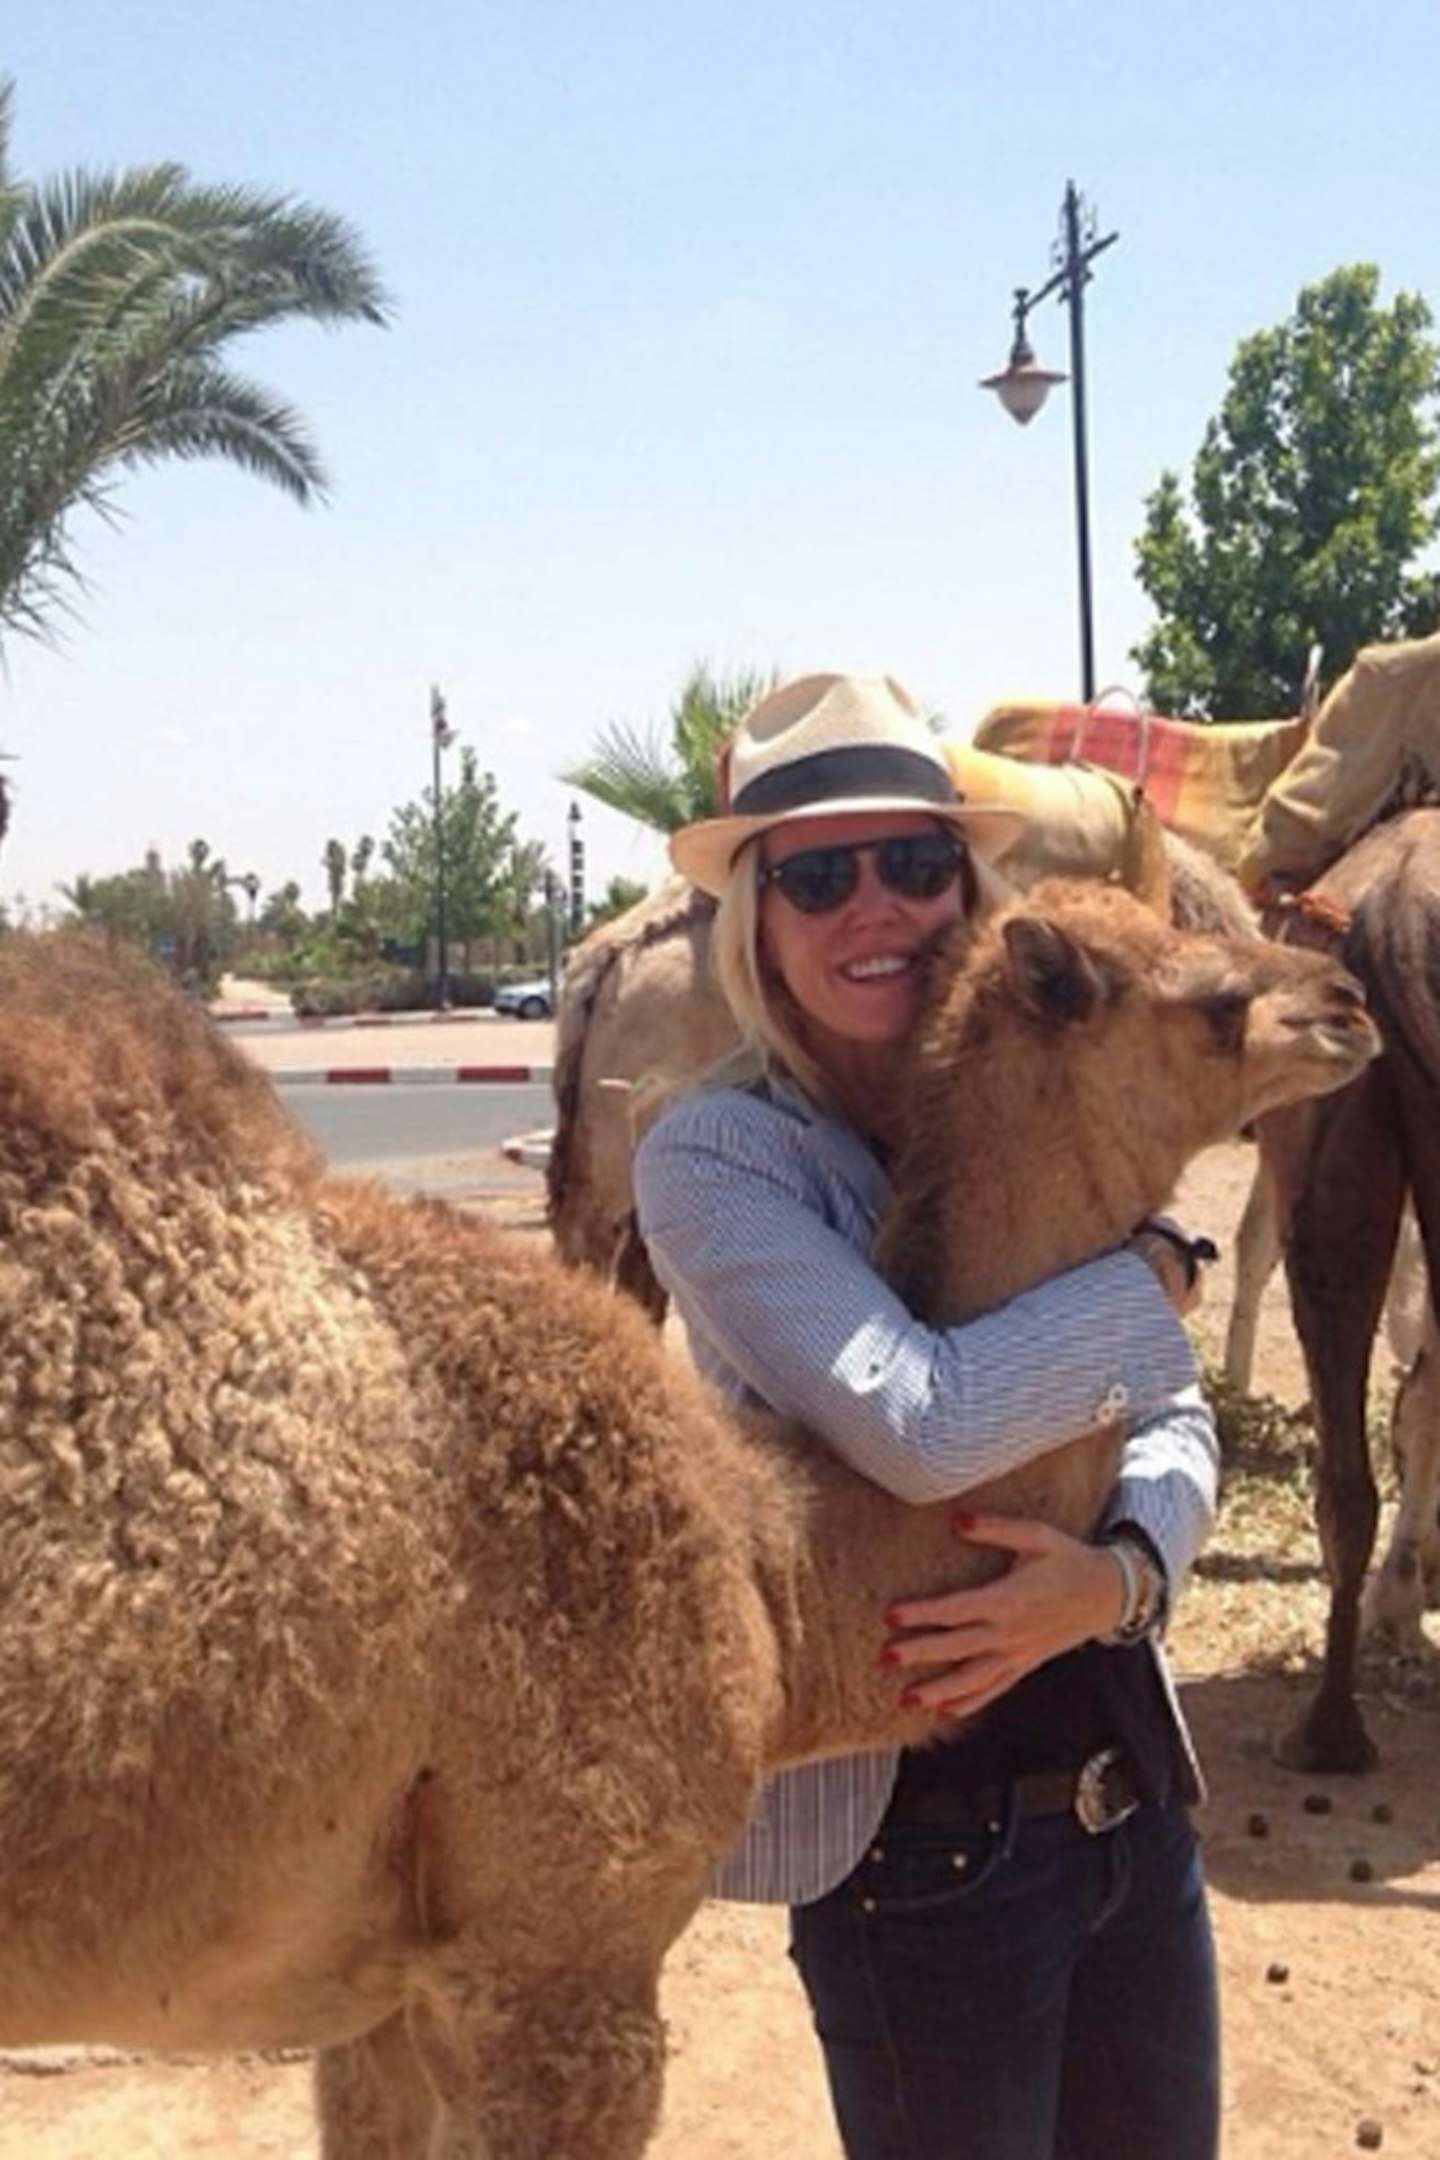 @alibambam: Fell in love with this baby!! #babycamel #marrakech #morocco #onegunranch